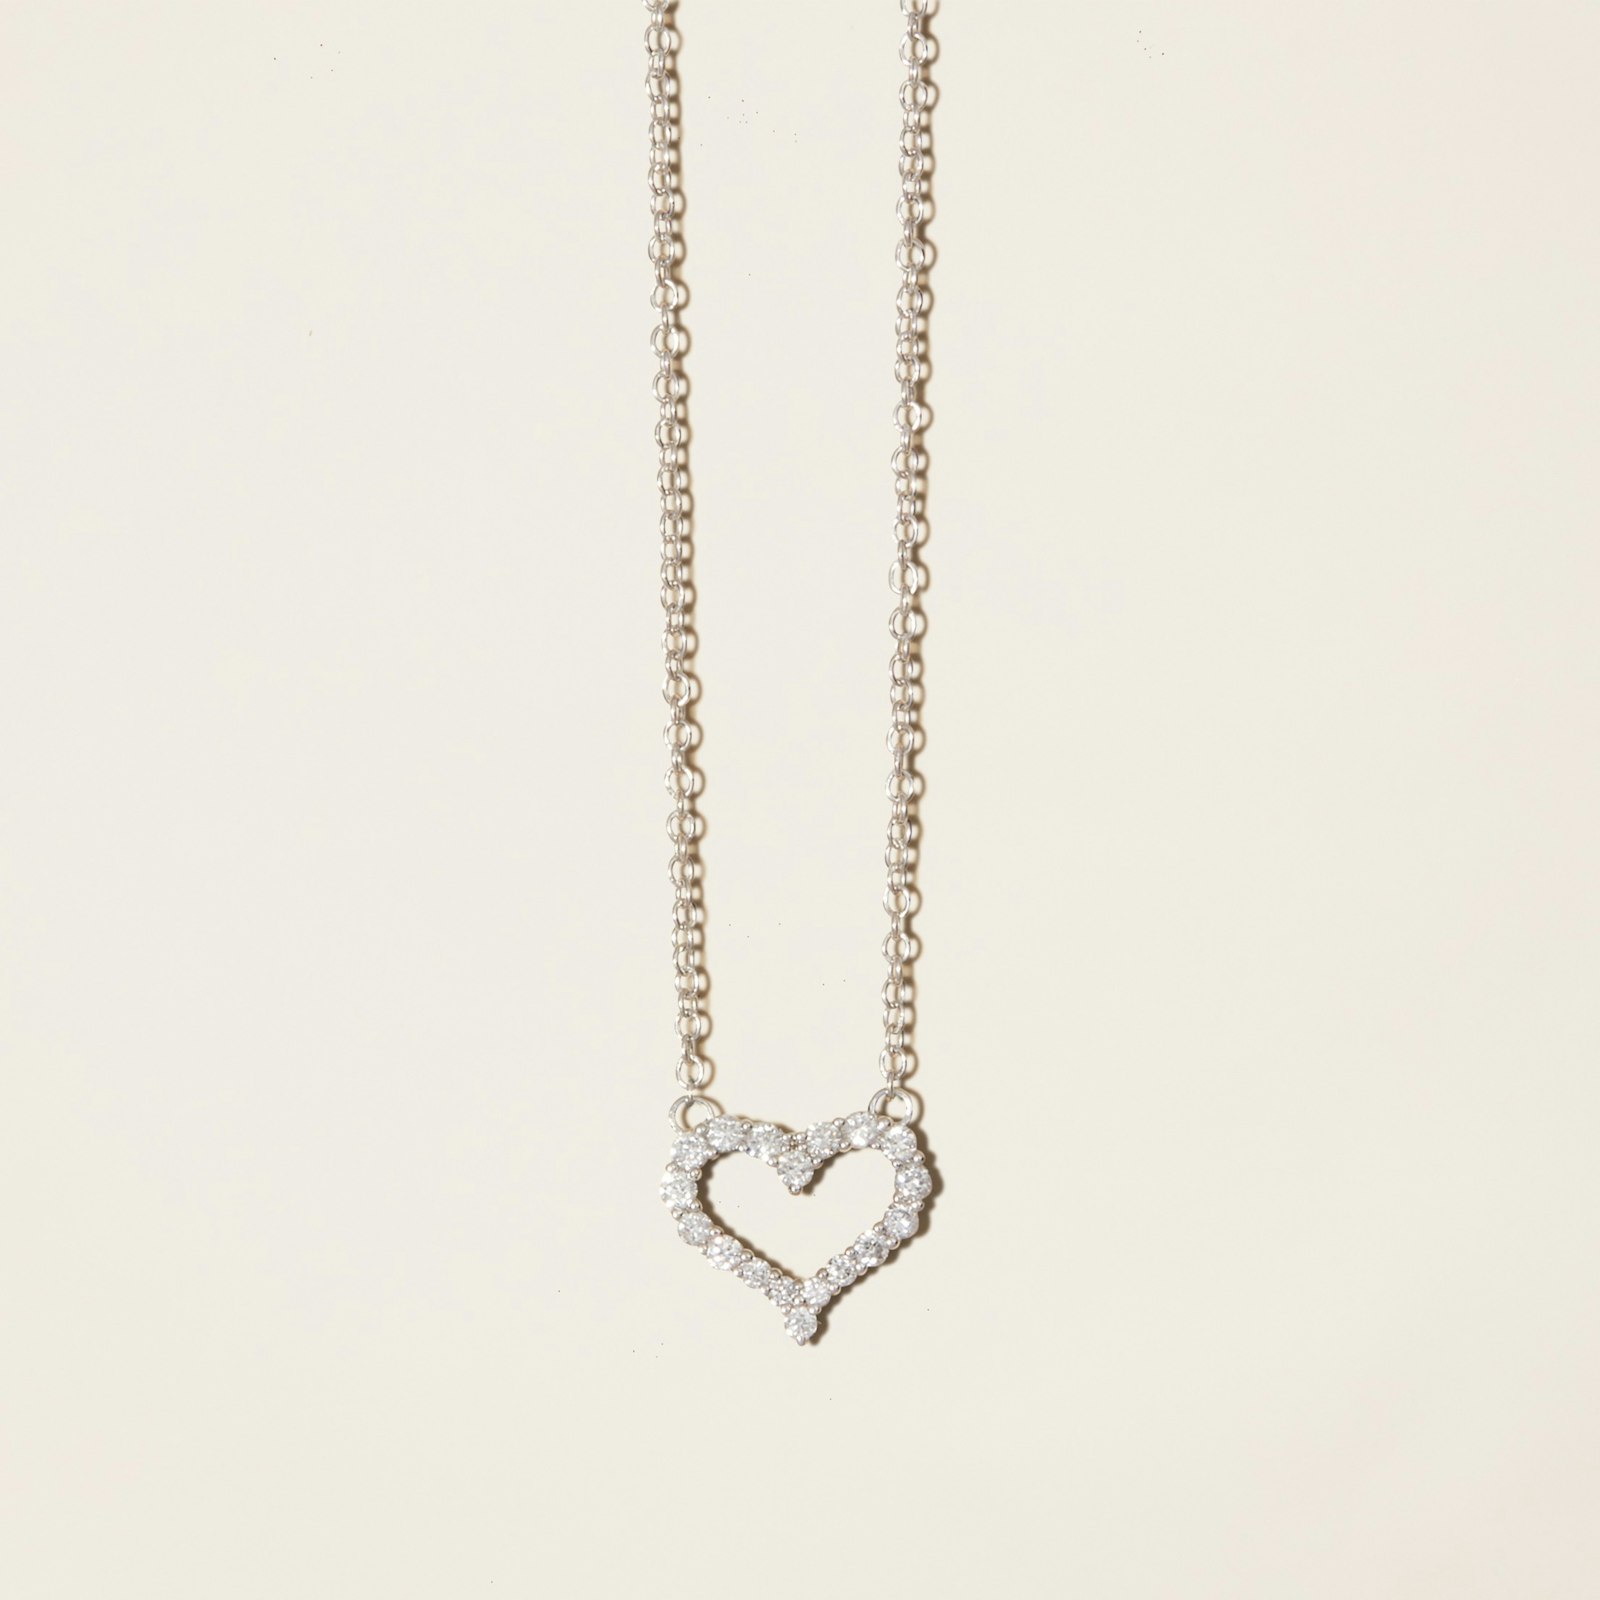 Swoon Diamond Heart Necklace_White Gold_Jewelry_Product_1x1_2485.jpg